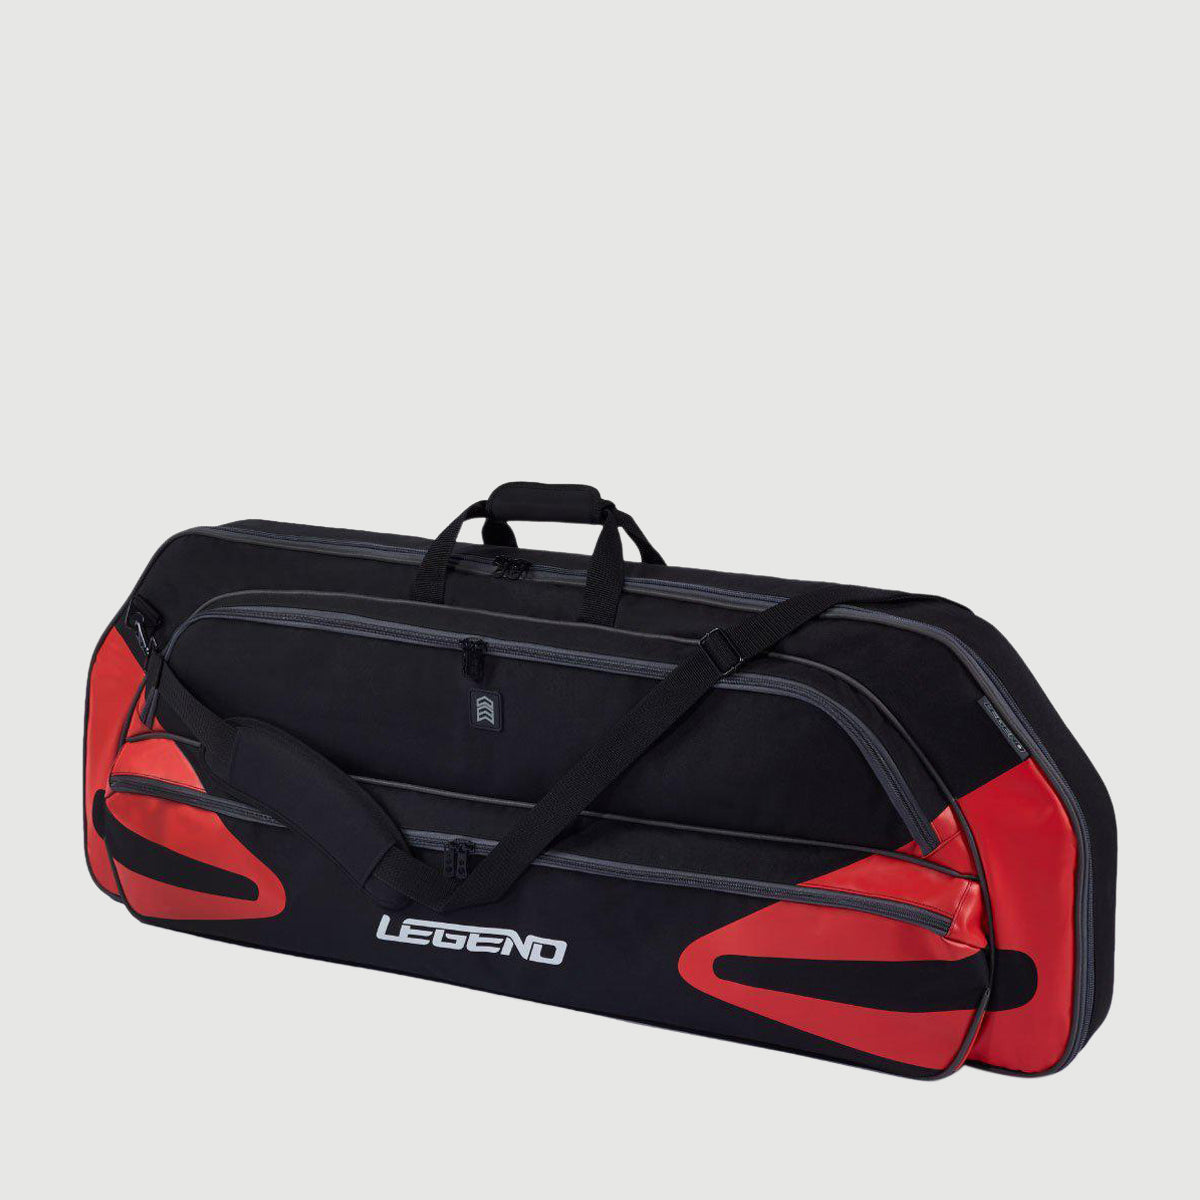 Superior protection with Black/Red Monstro Bow Case - Legend Archery, The toughest and lightest bow case - Black/Blue Monstro Bow Case - Legend Archery